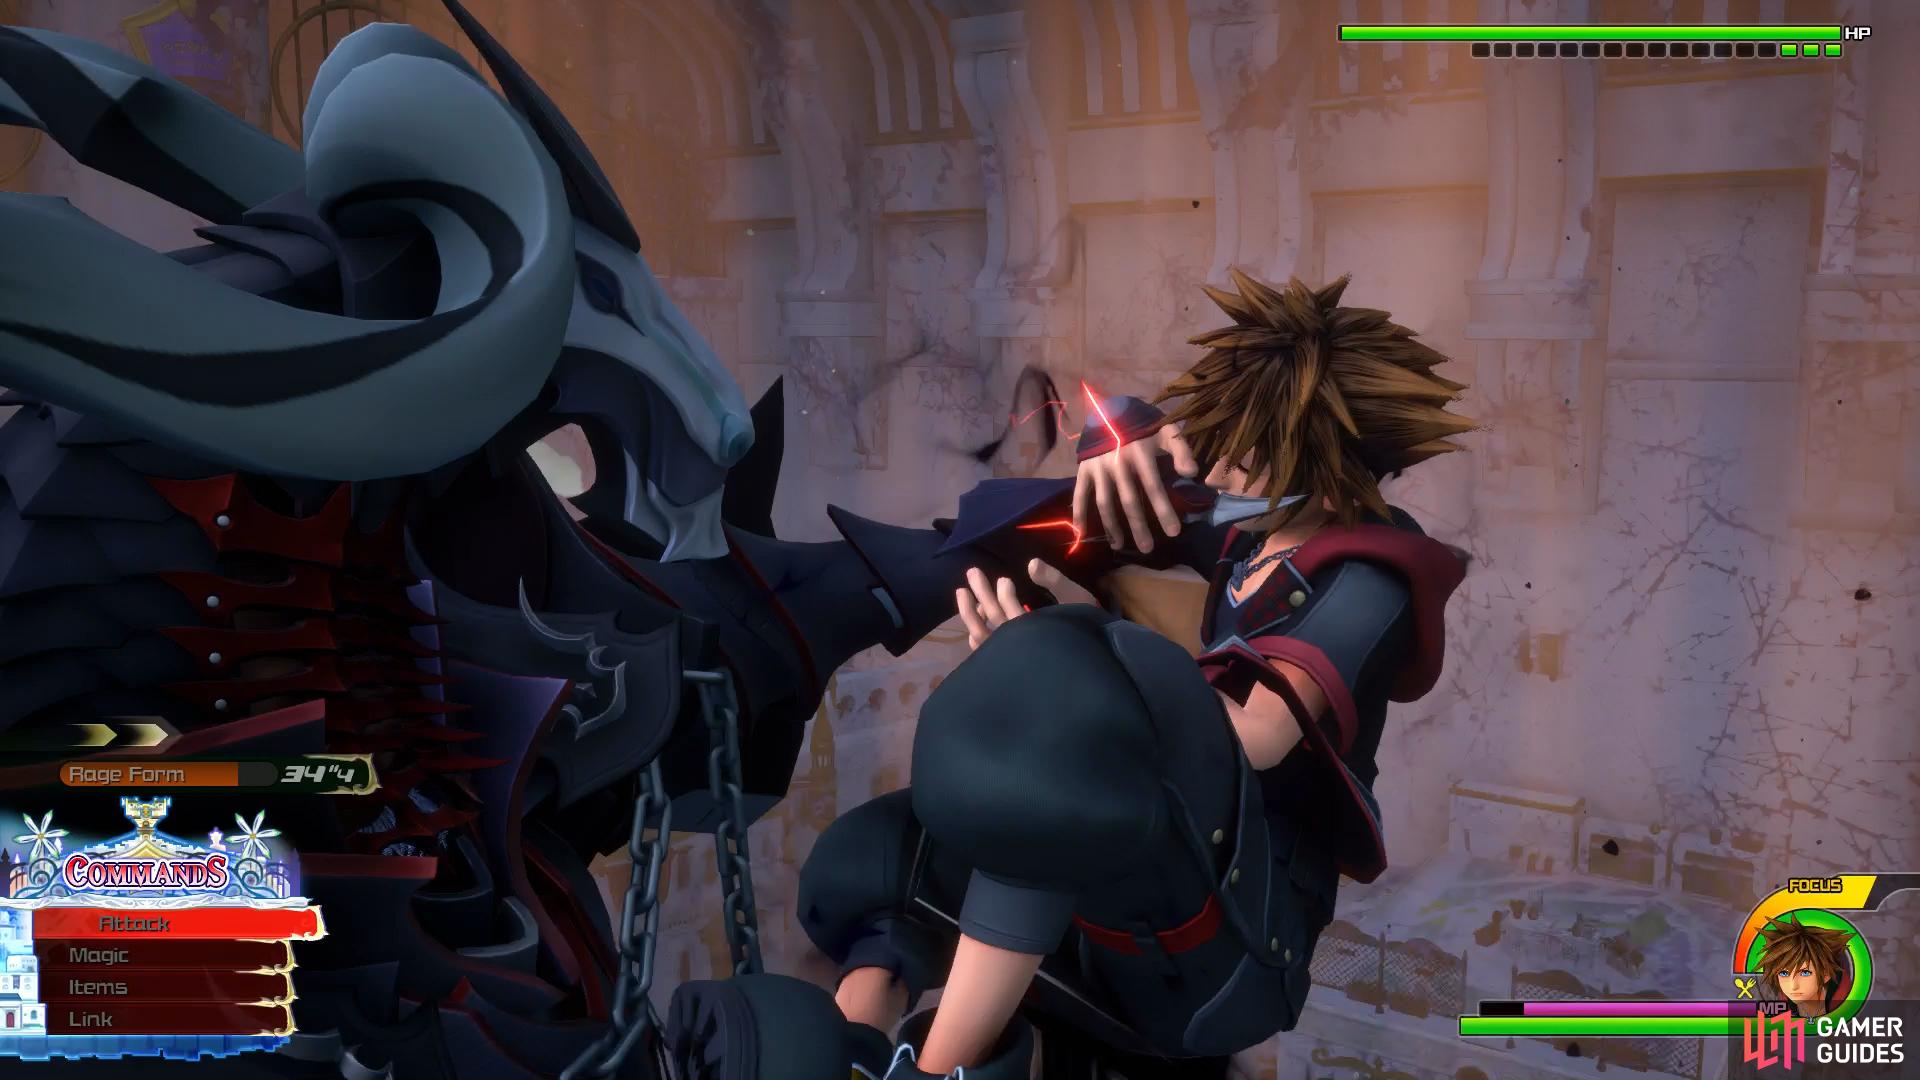 in the final phase, Armored Xehanort will grab and throw Sora to the ground.